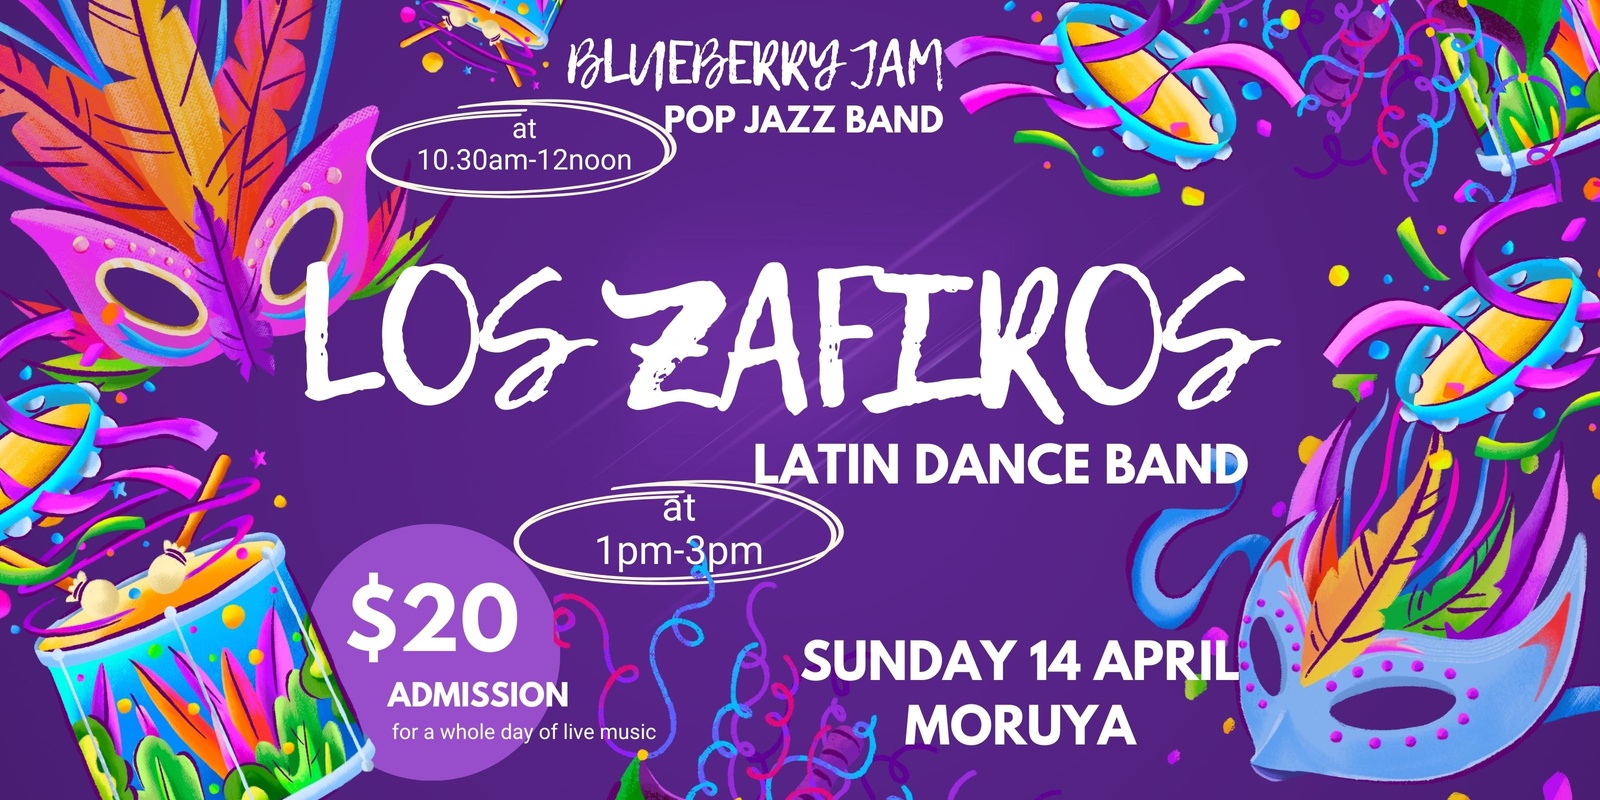 Banner image for Los Zafiros and Blueberry Jam